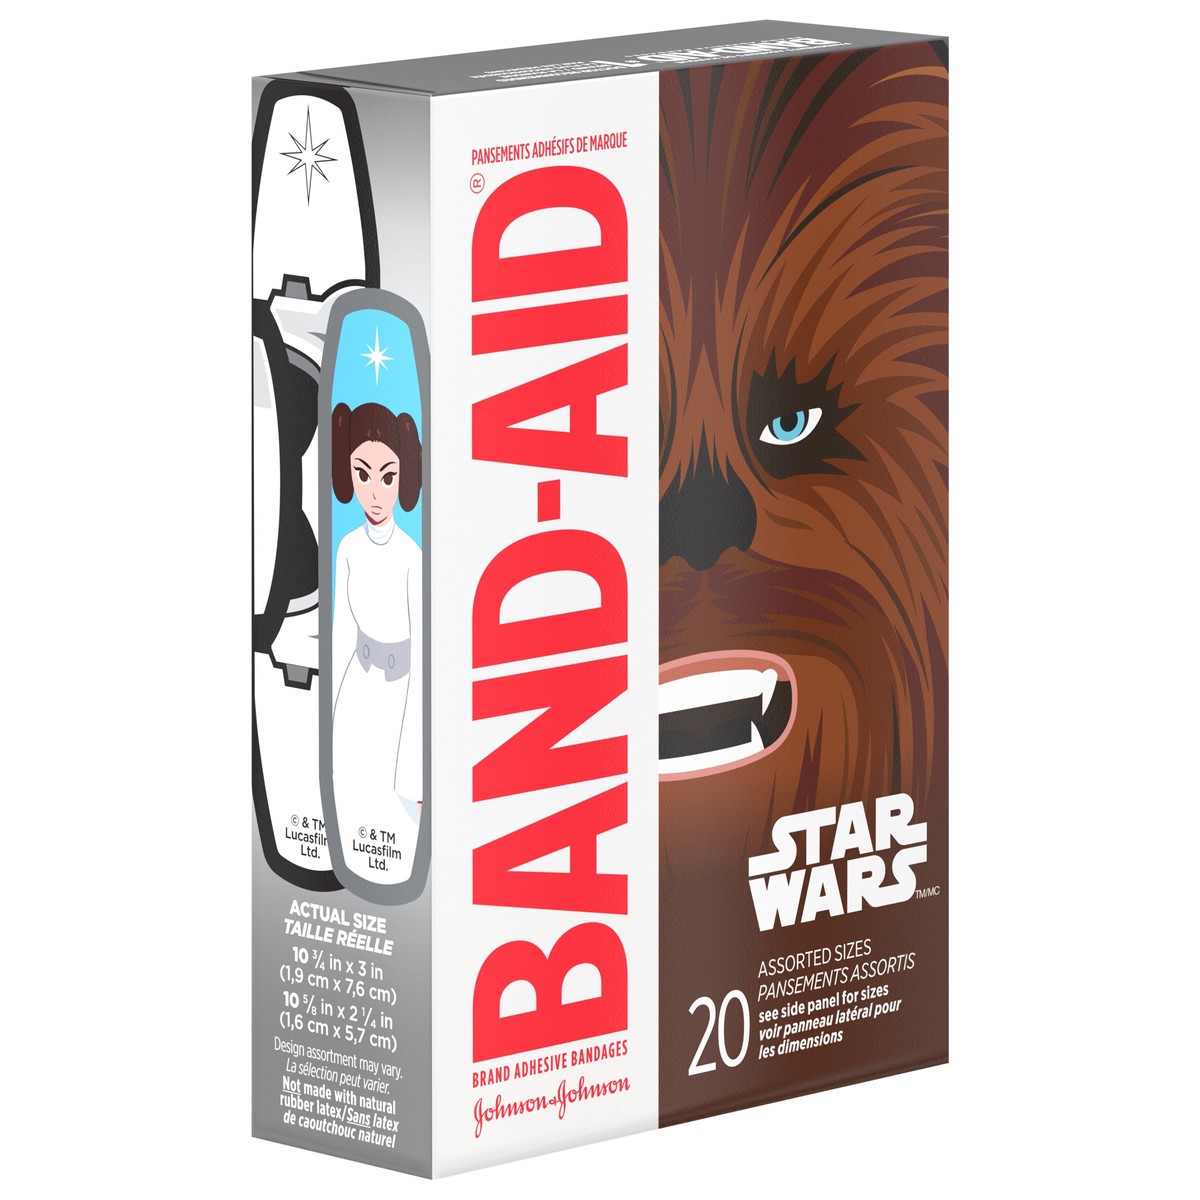 slide 3 of 9, BAND-AID Adhesive Bandages for Minor Cuts and Scrapes, Featuring Star Wars Characters for Kids, Assorted Sizes 20 ct, 20 ct